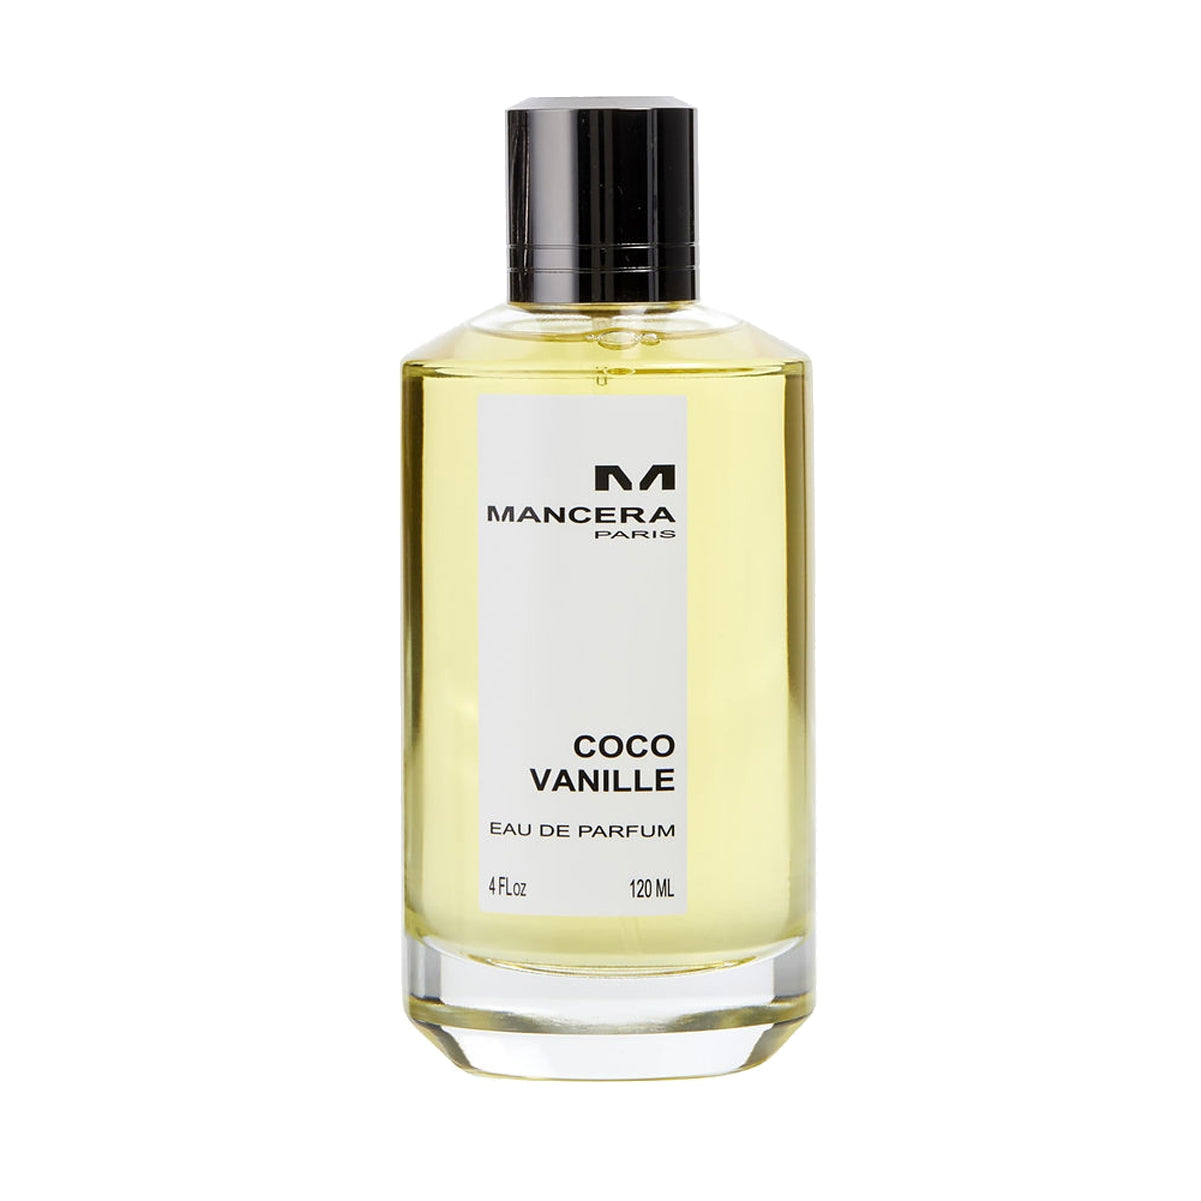 Coco Vanille by Mancera is a Amber Vanilla fragrance for men and women. Coco  Vanille was launched in 2016. The nose behind this…